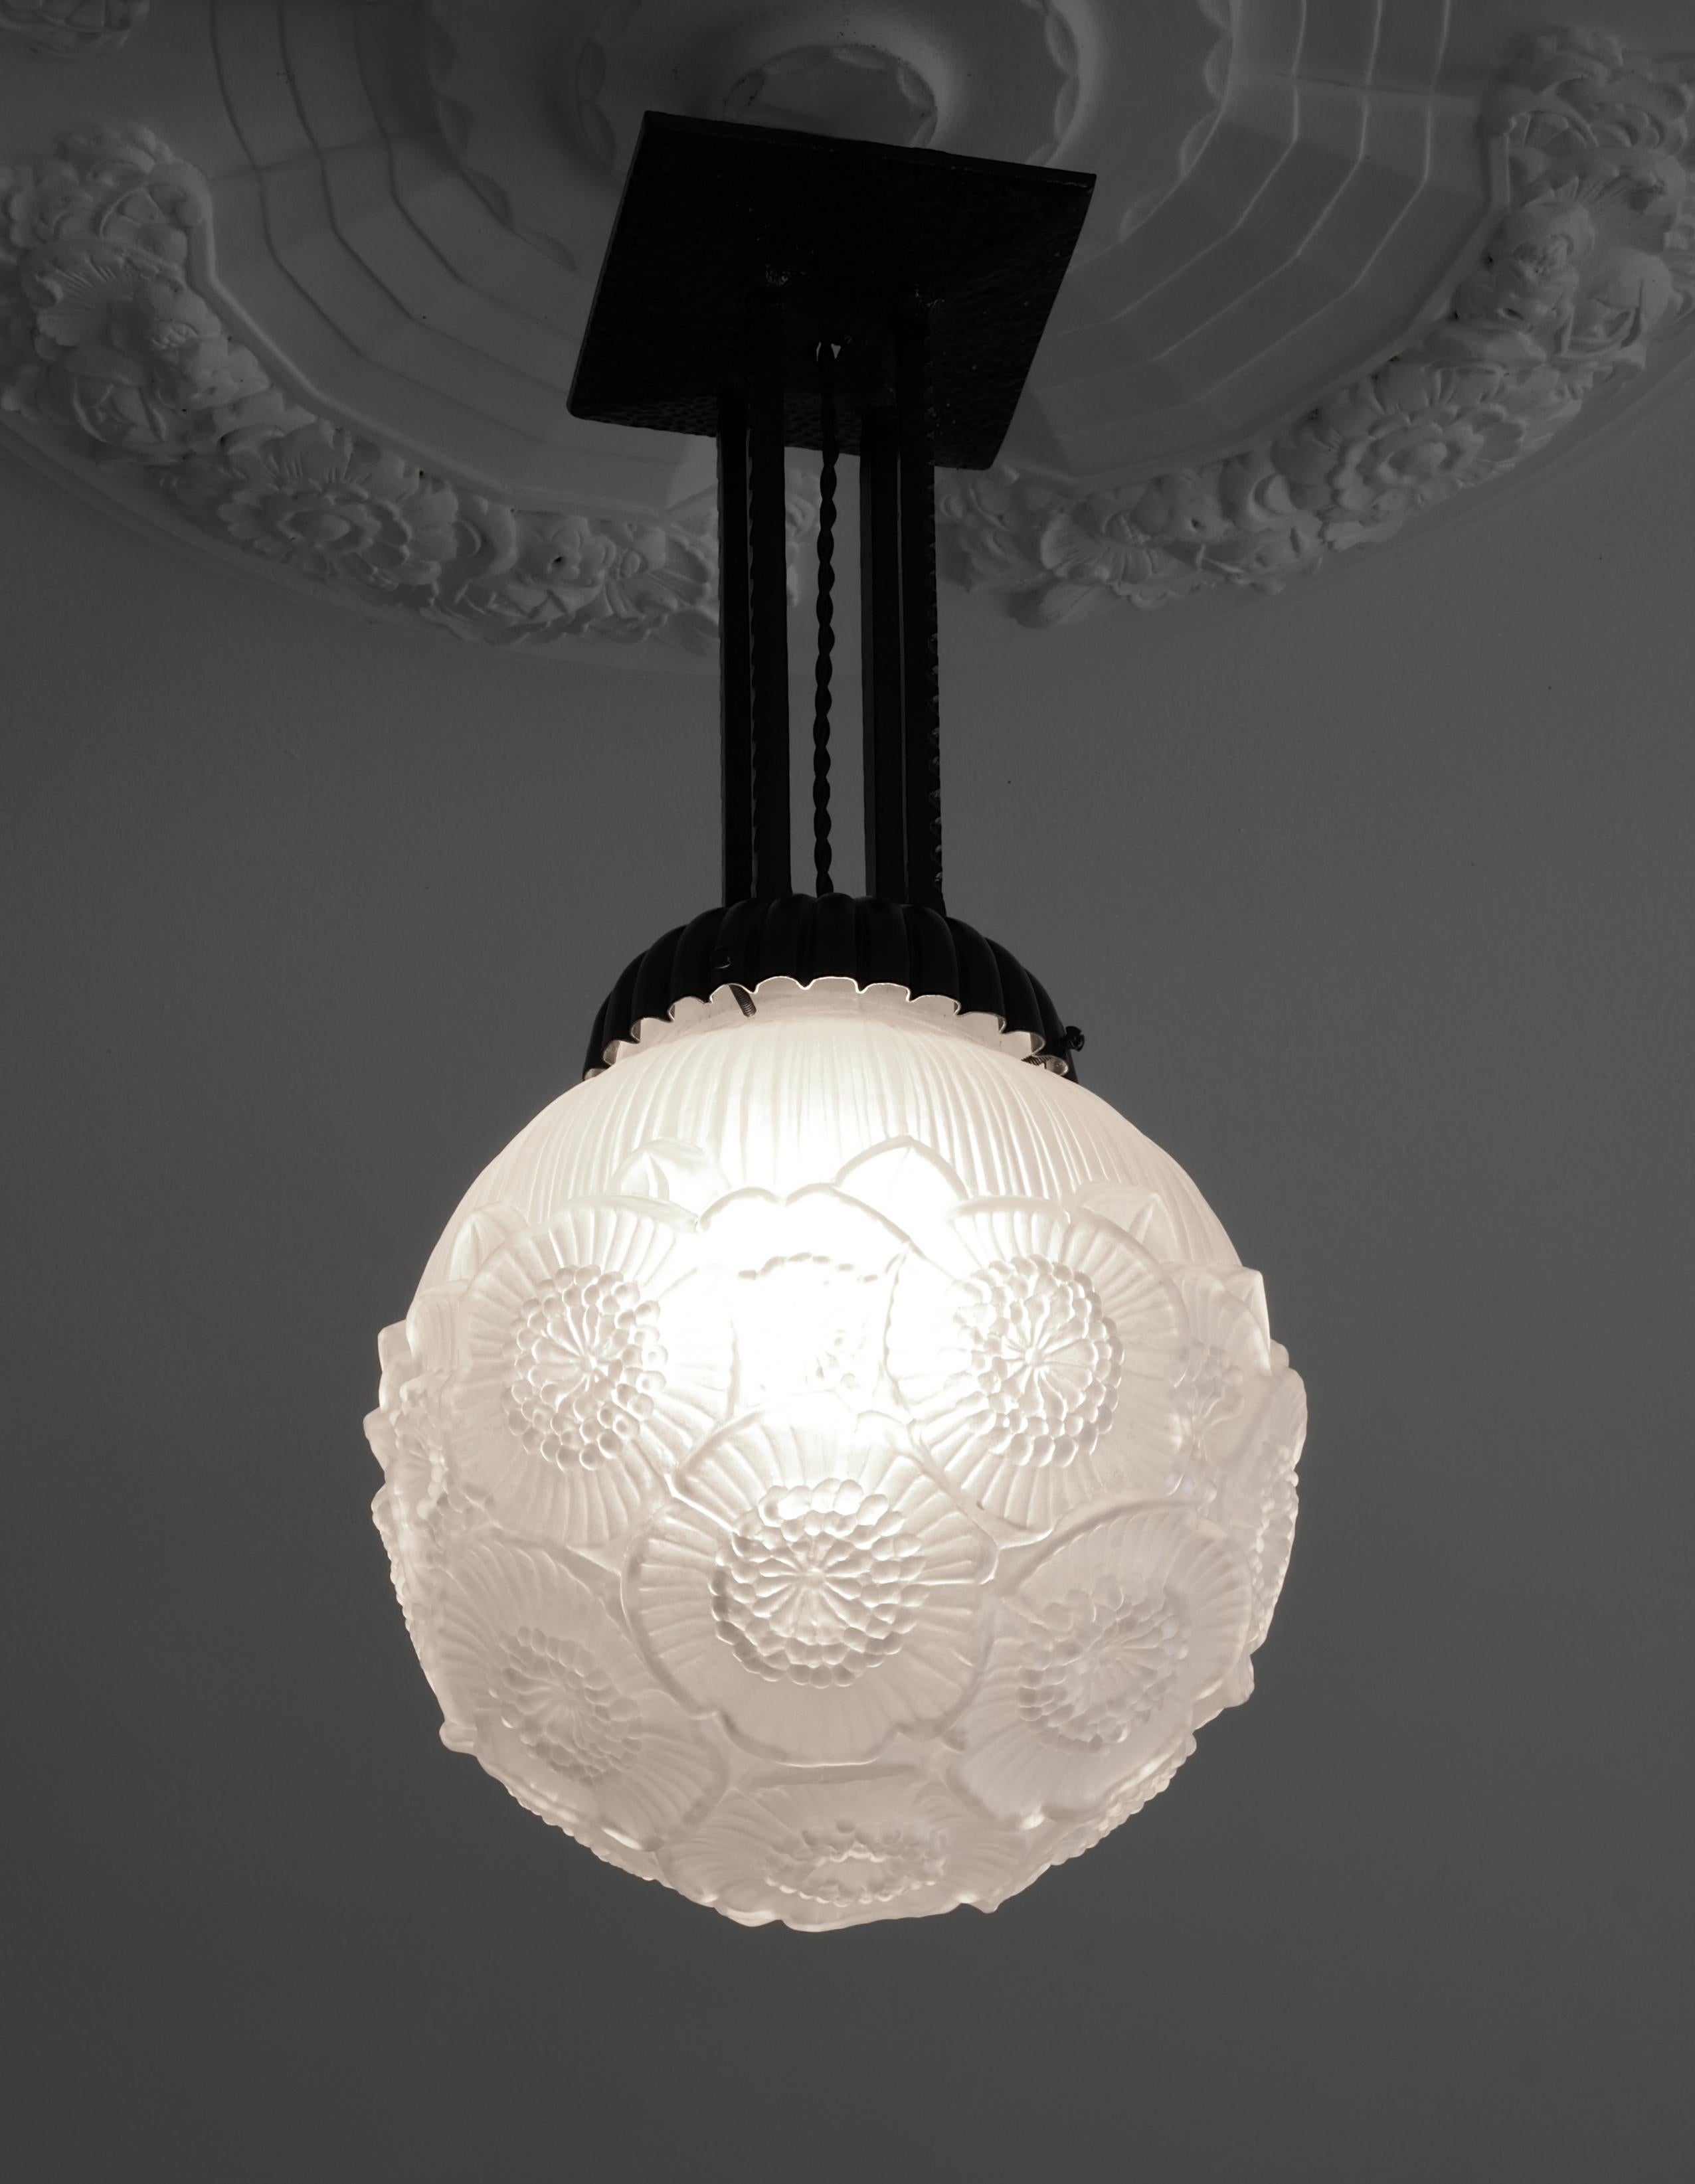 French Art Deco ball pendant chandelier by Maurice Model (Verdun), France, early 1930s. Floral decor. Molded-pressed satiny glass shade. Iron fixture. Height: 20